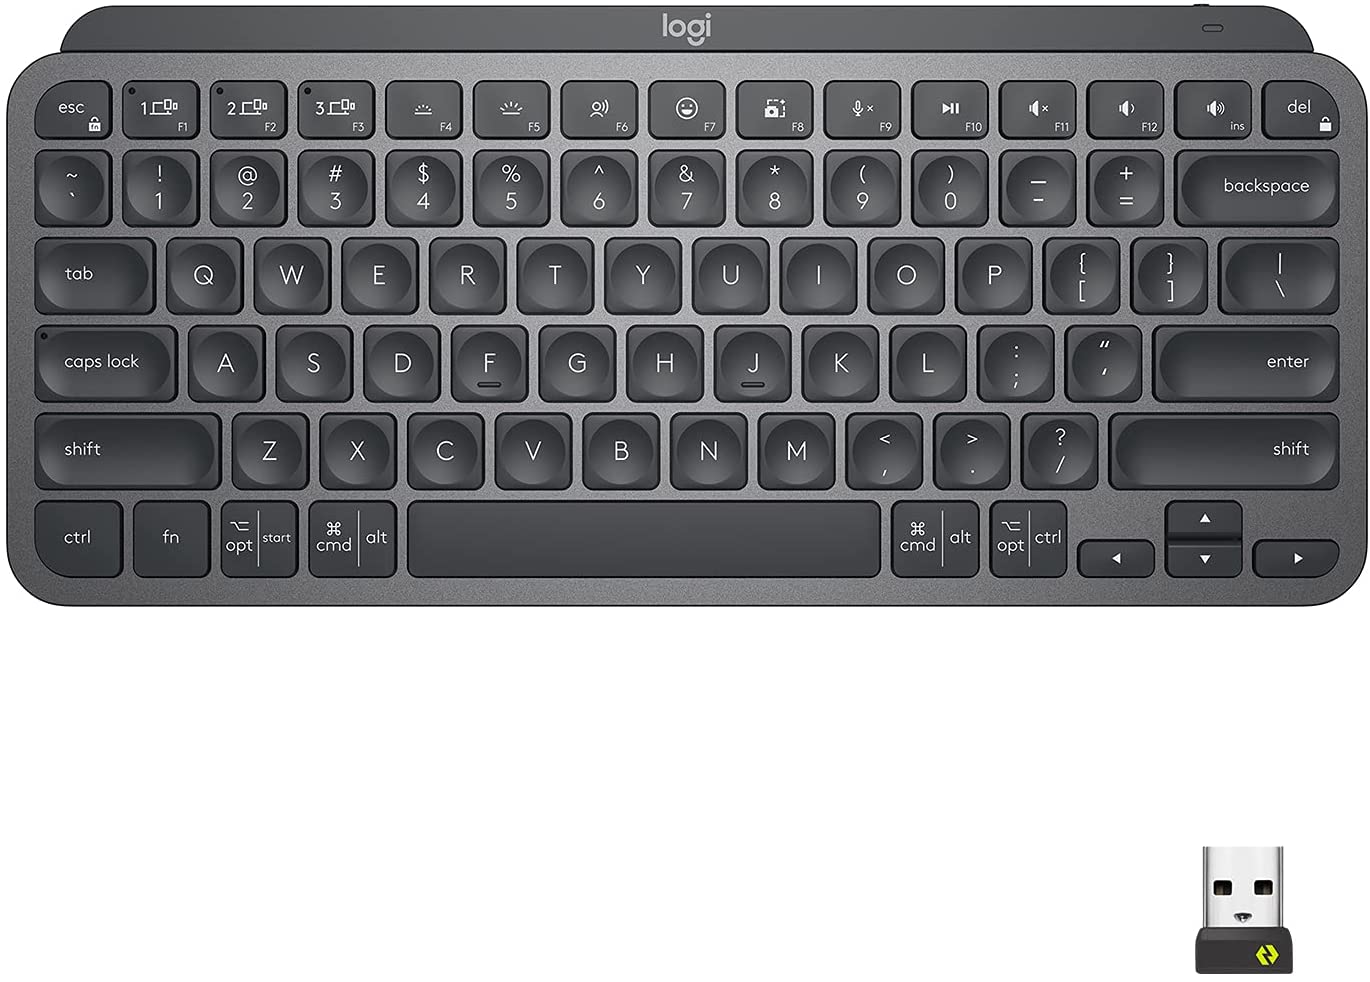 Logitech MX Keys Mini Wireless Illuminated Keyboard for Business, Compact, Logi Bolt USB Receiver, Backlit, Rechargeable, Windows, macOS, Linux, iOS, Android, Metal Build - Graphite